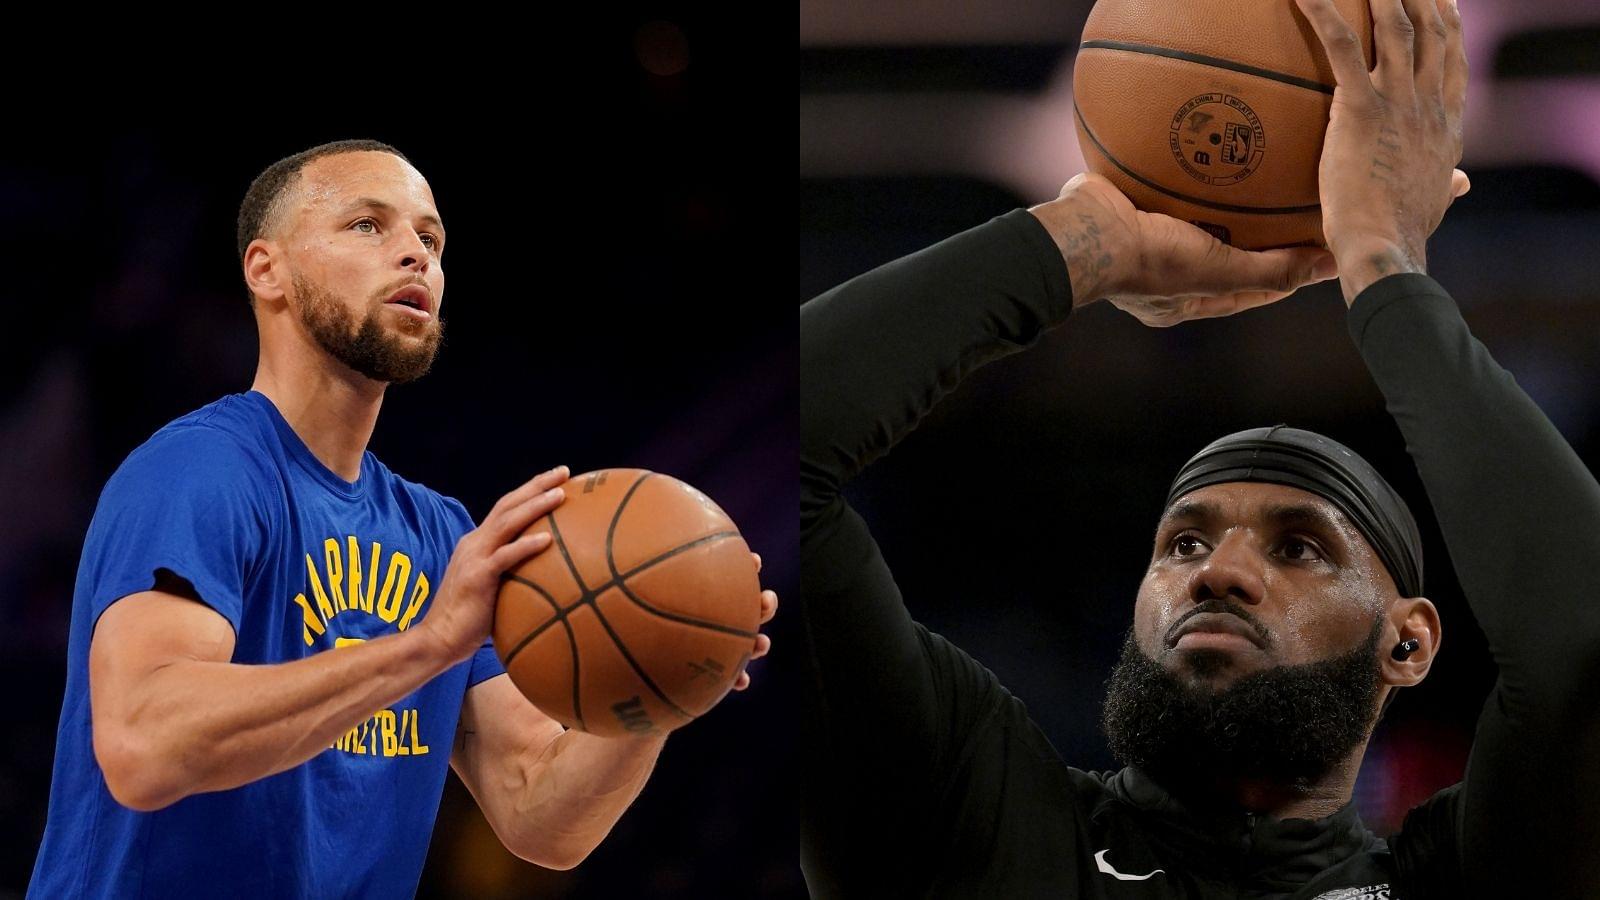 "LeBron James and Stephen Curry are the worst 3-point shooters in clutch": The Lakers and Warriors MVPs are having a tough time in crunch time this season